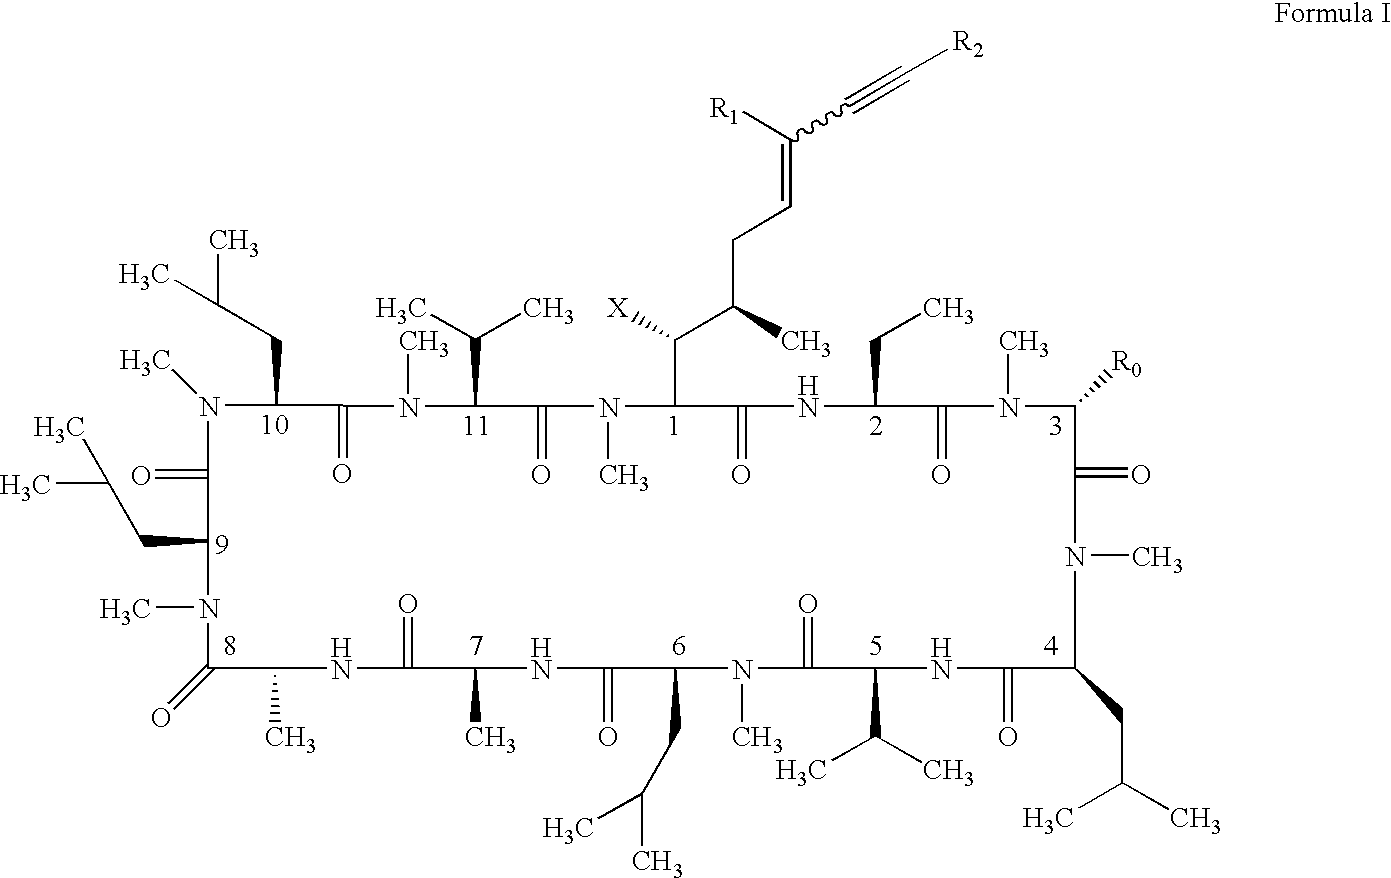 Cyclosporin alkyne analogues and their pharmaceutical uses